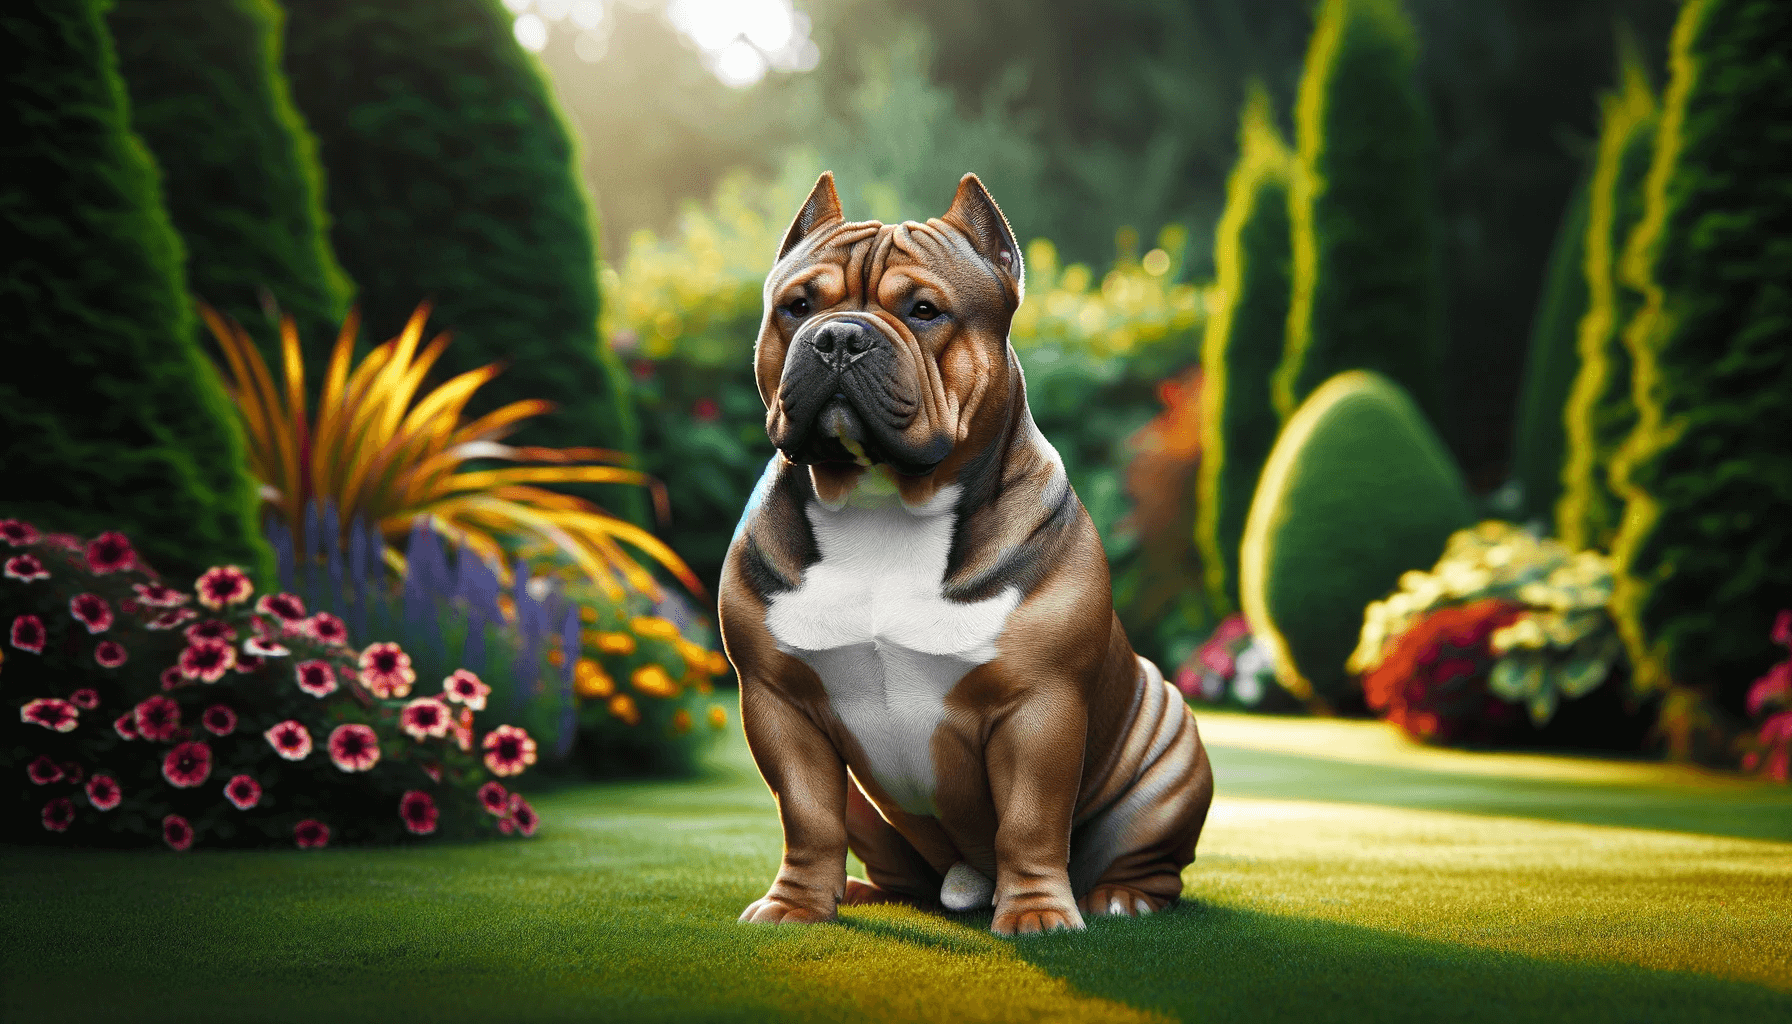 Exotic Bully sitting calmly in a serene garden with a sturdy frame.